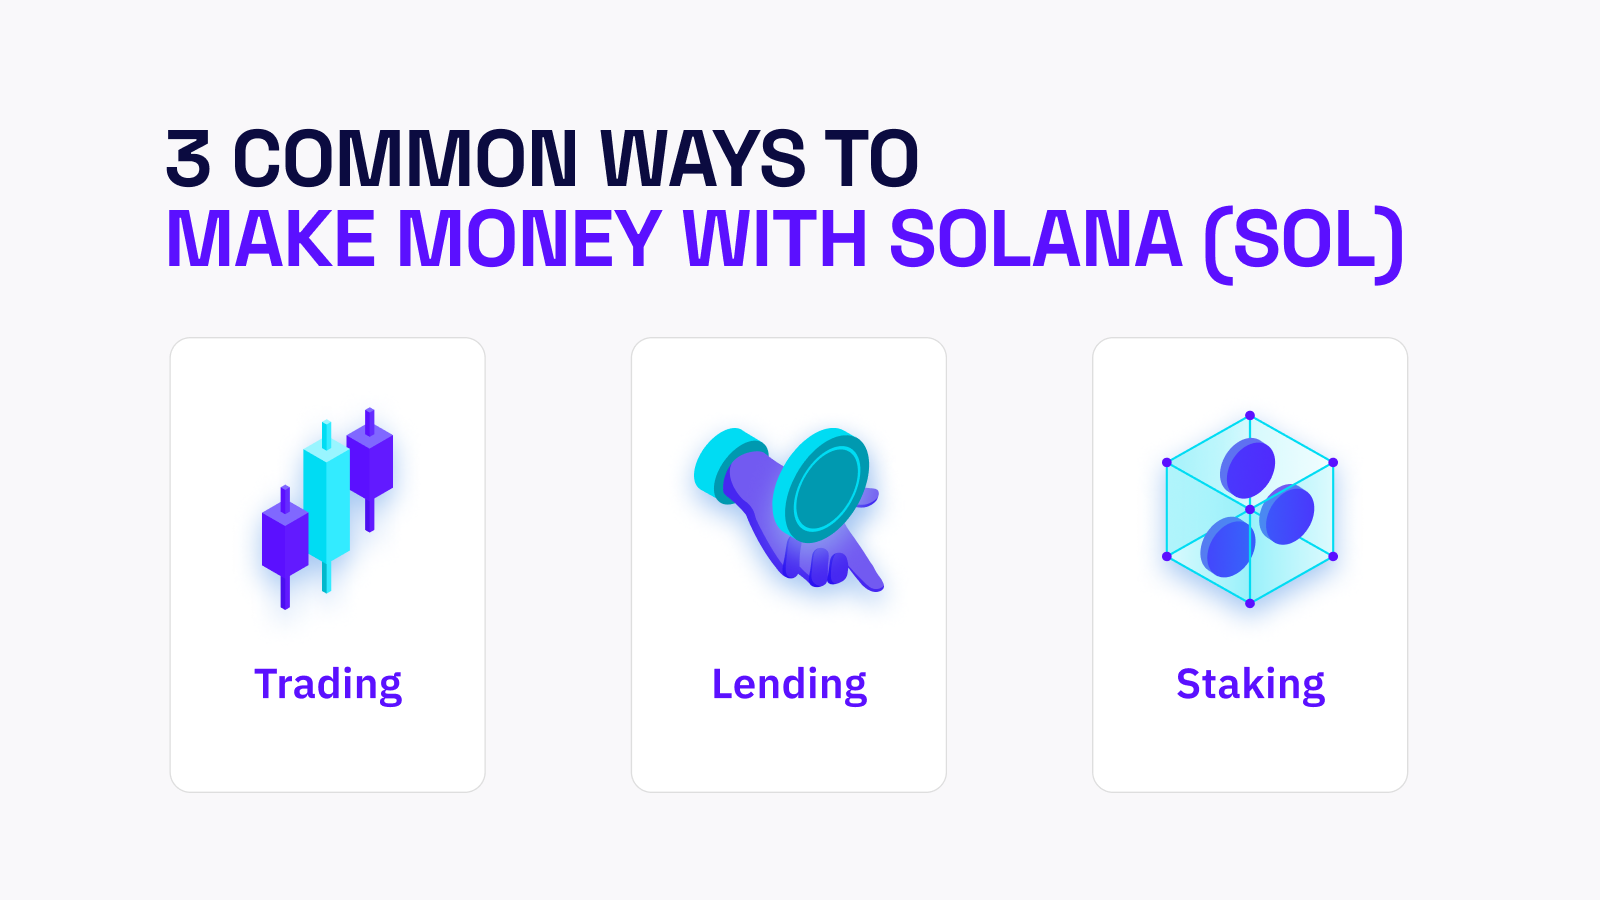 Can You Make Money with Solana (SOL)?